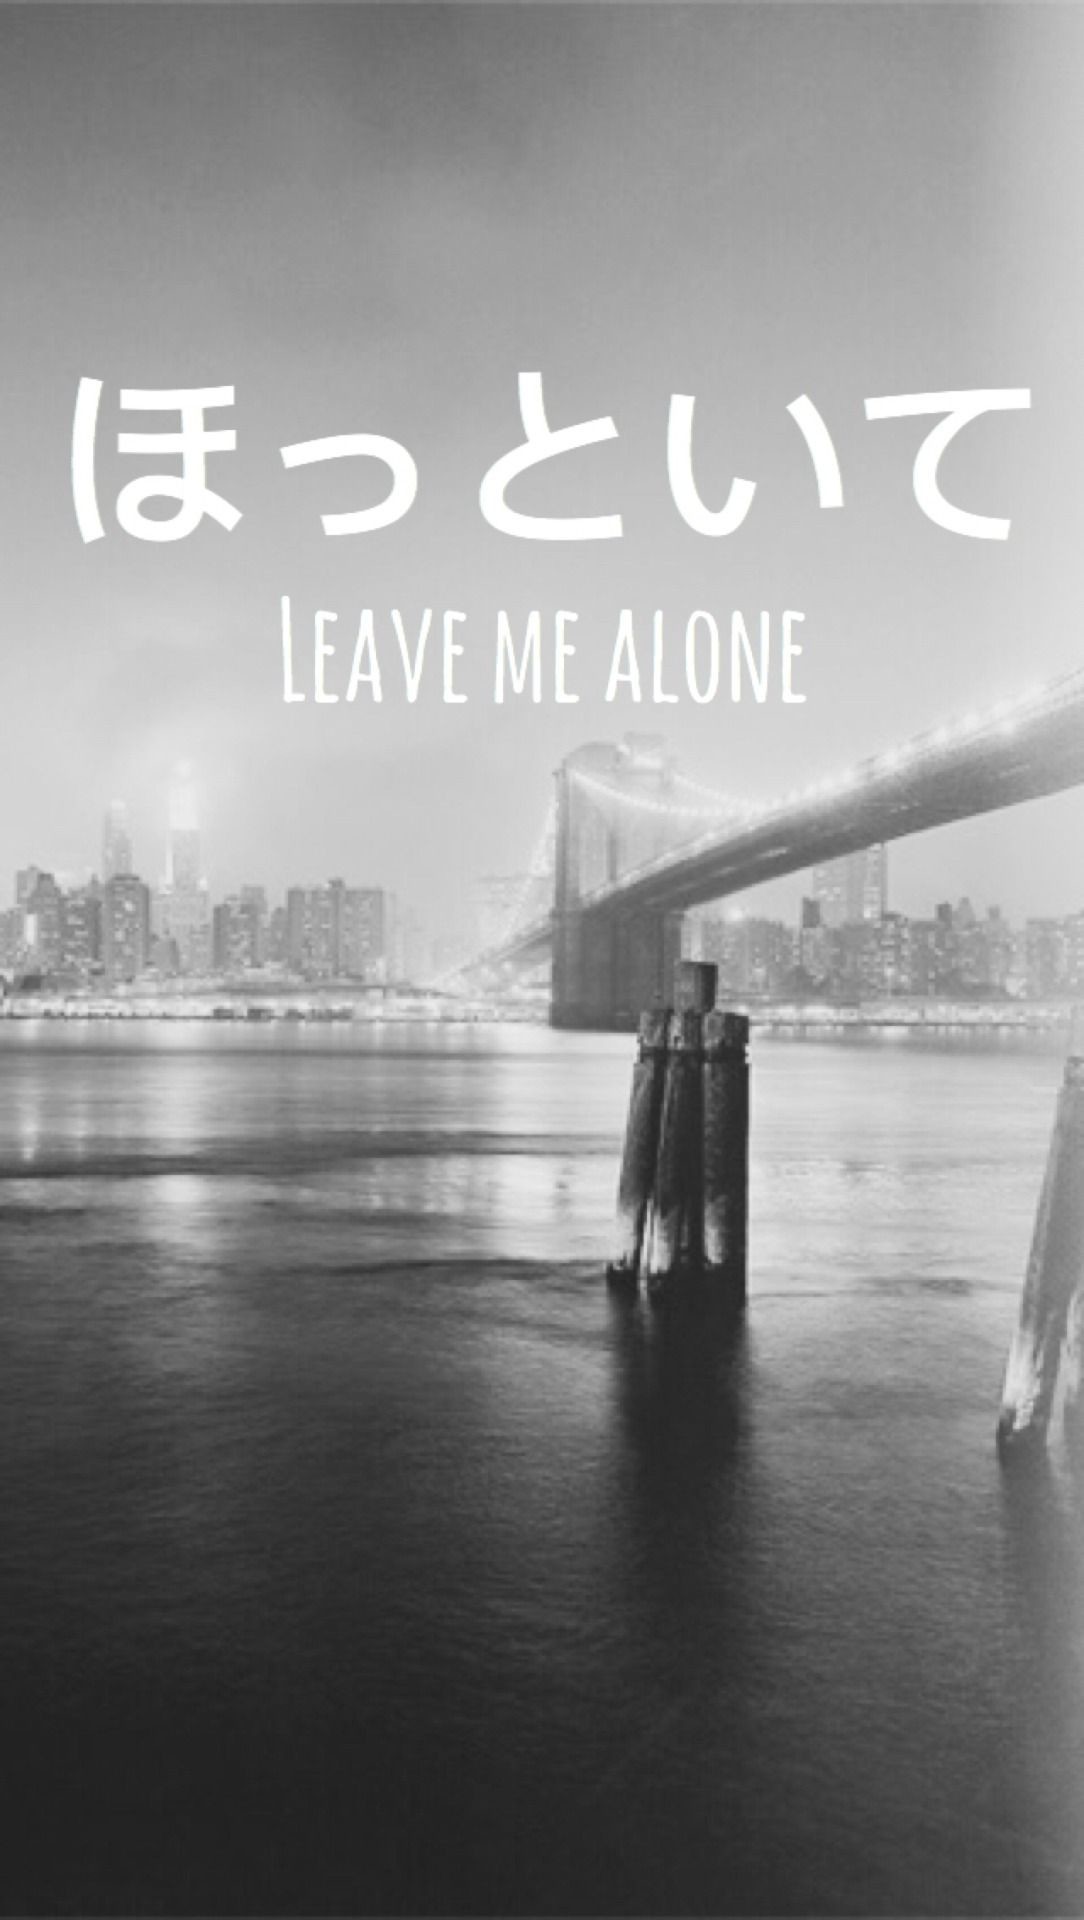 leave me alone wallpaper,white,photograph,black and white,text,font